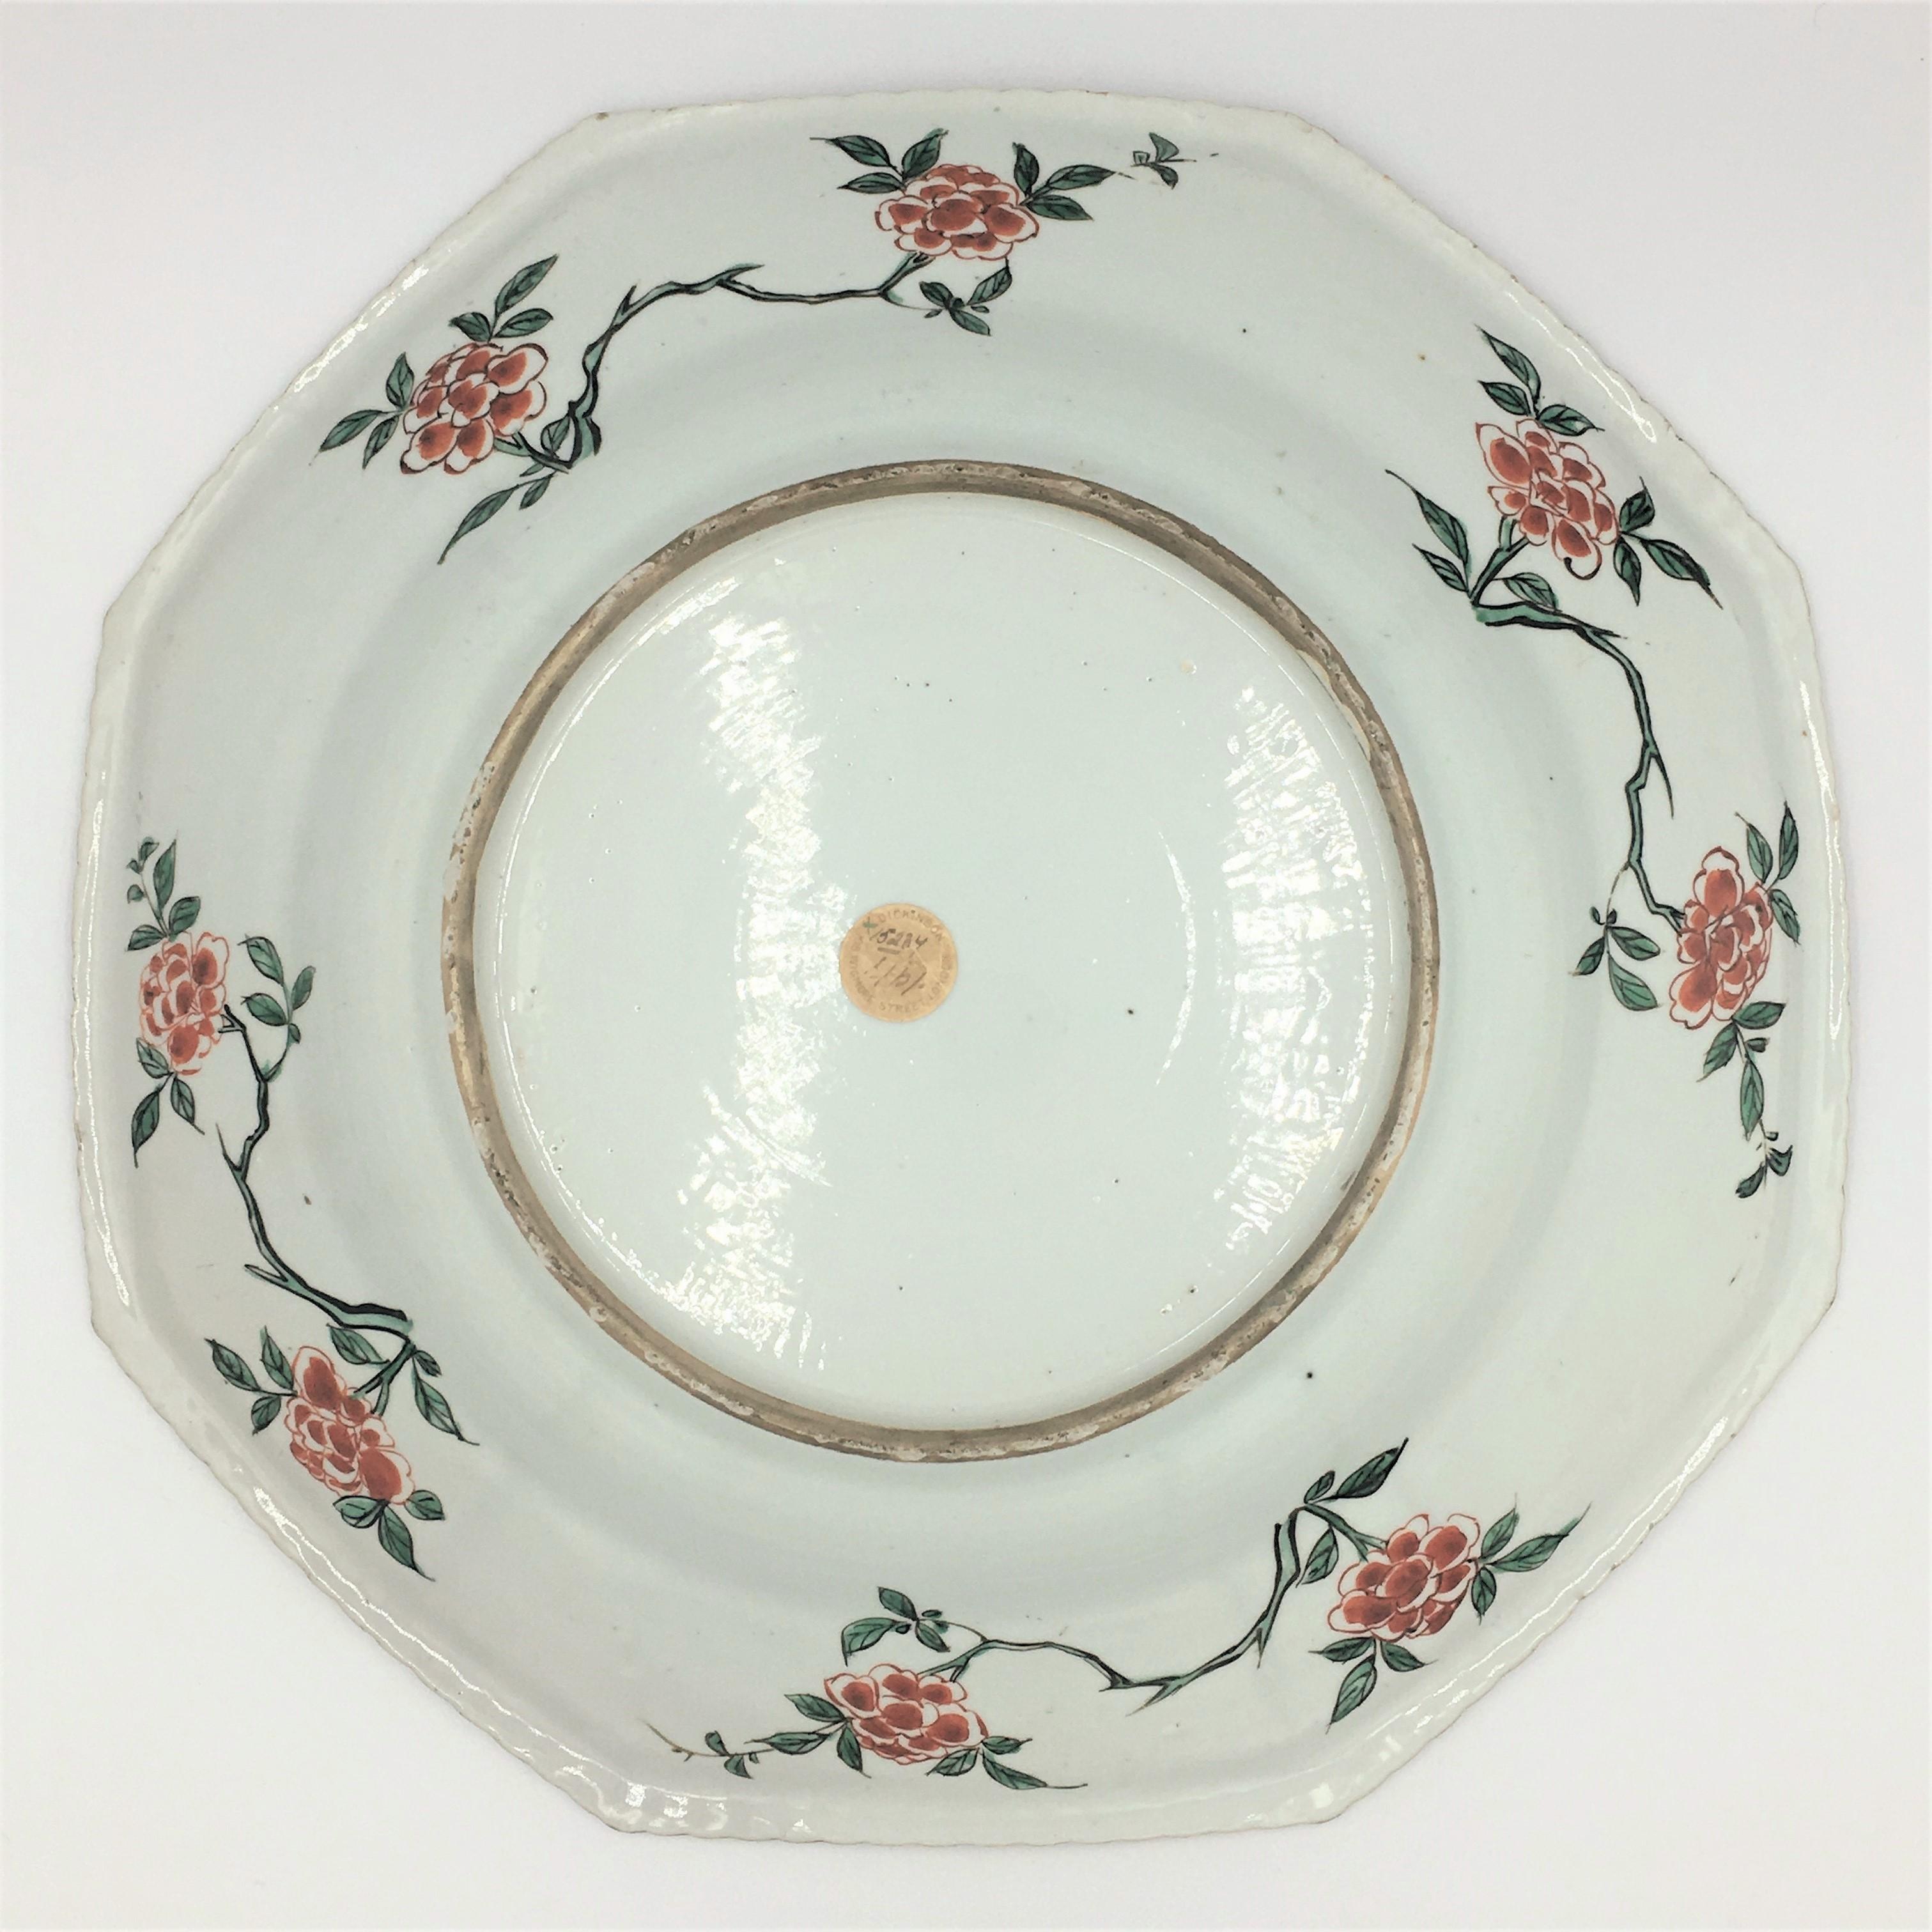 Kangxi period
A large Chinese Kangxi period Famille Verte octagonal dish having fine enamel decoration throughout. Two courting birds in a garden, which is framed by phoenix’s and peony’s in the octagonal piecrust enamel border. This is the middle